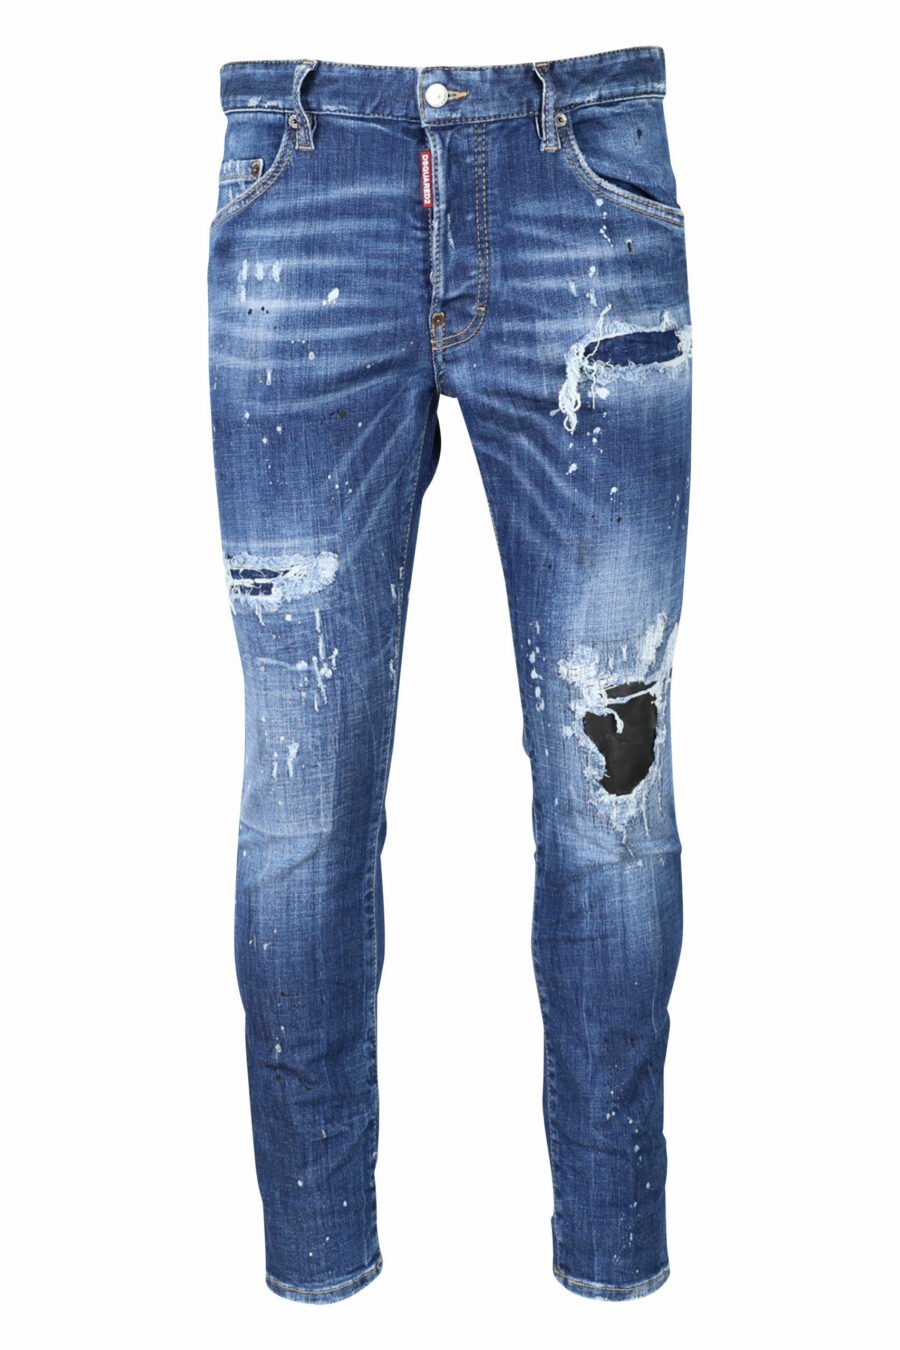 Jeans "super twinkey jean" blue frayed with black ripped - 8054148124328 scaled